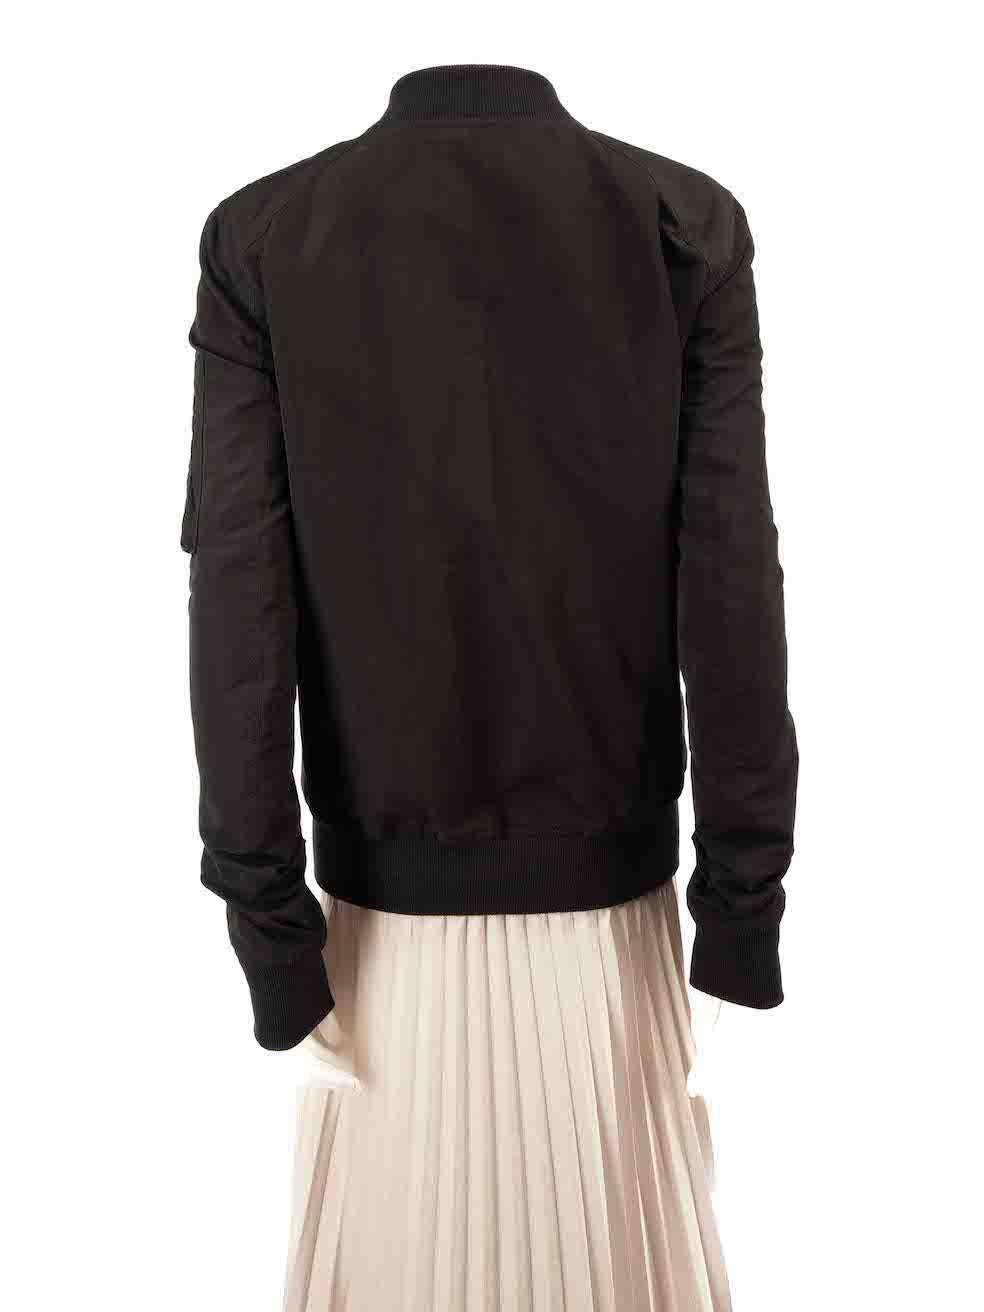 Rick Owens Black Zip Up Bomber Jacket Size XXL In Excellent Condition For Sale In London, GB